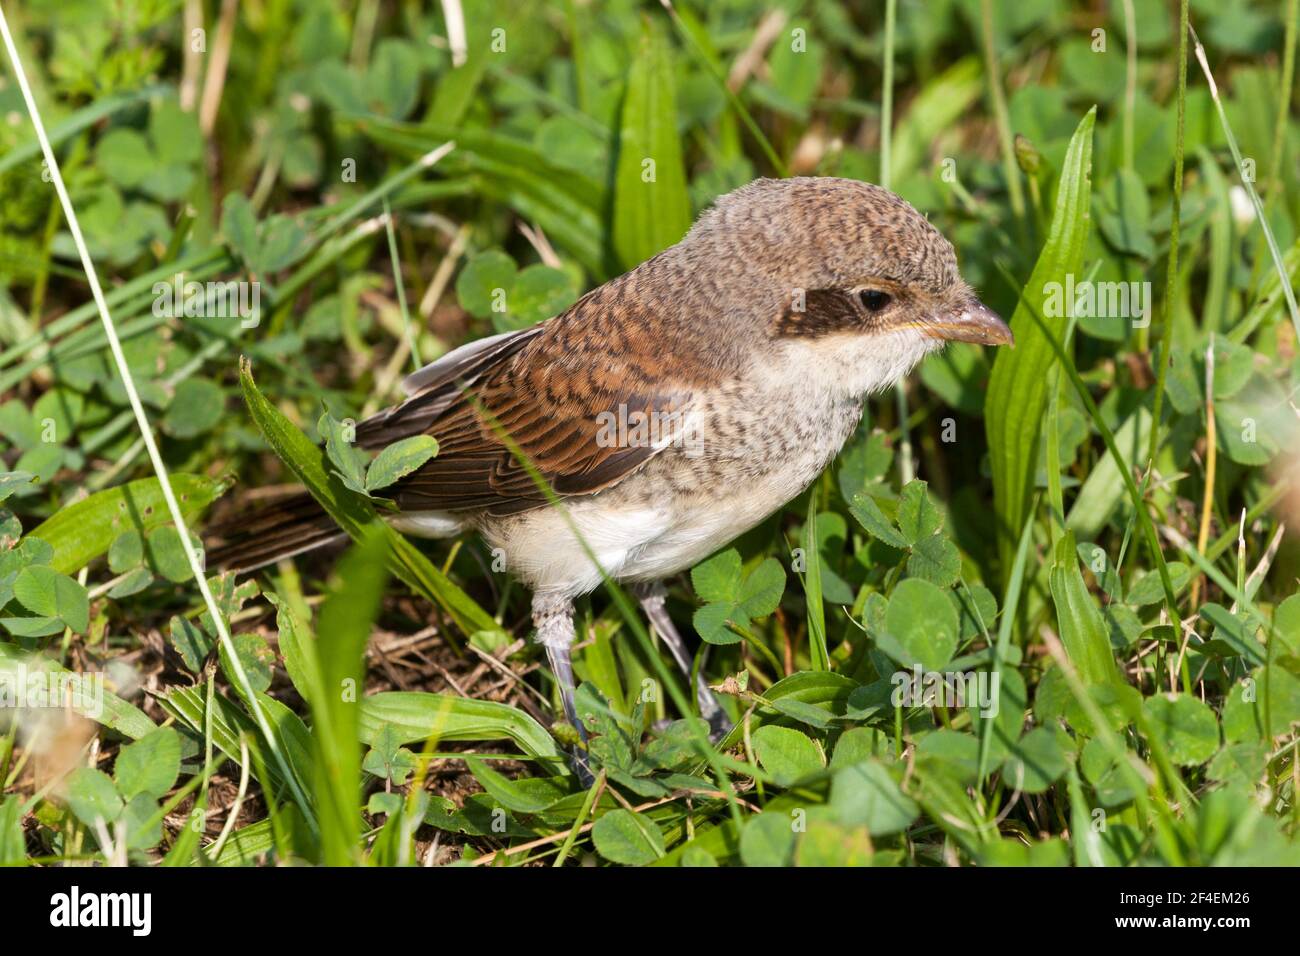 Red backed shrike ( Lanius Collurio ) young bird in grass Stock Photo